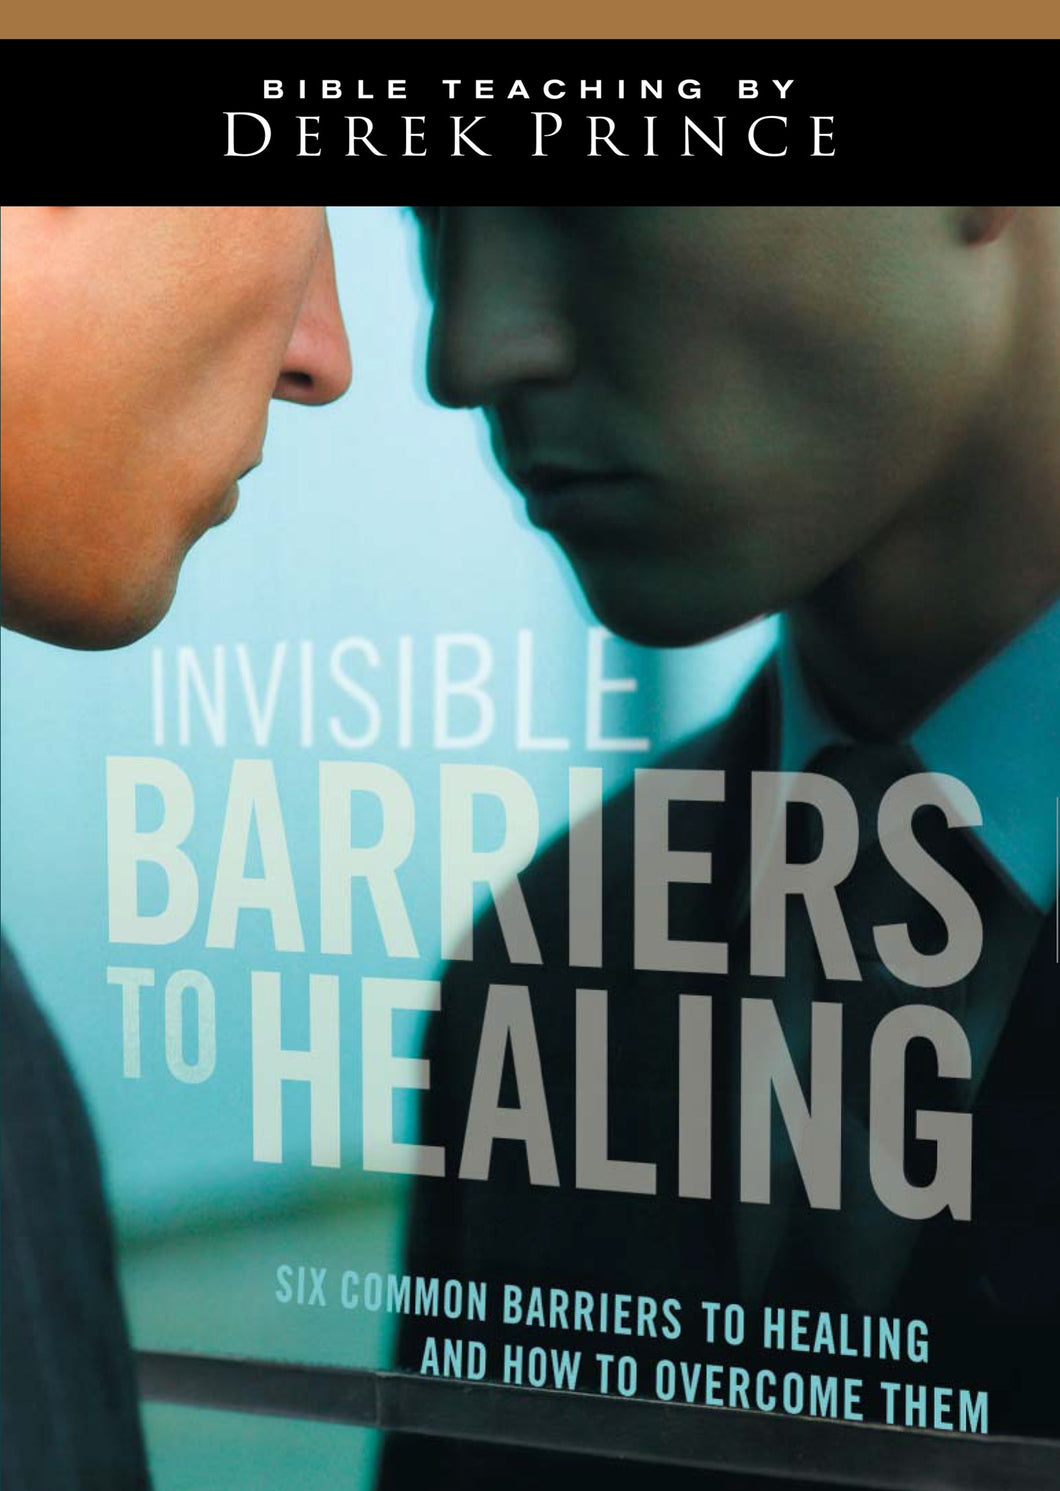 Audio CD-Invisible Barriers To Healing (1 CD)